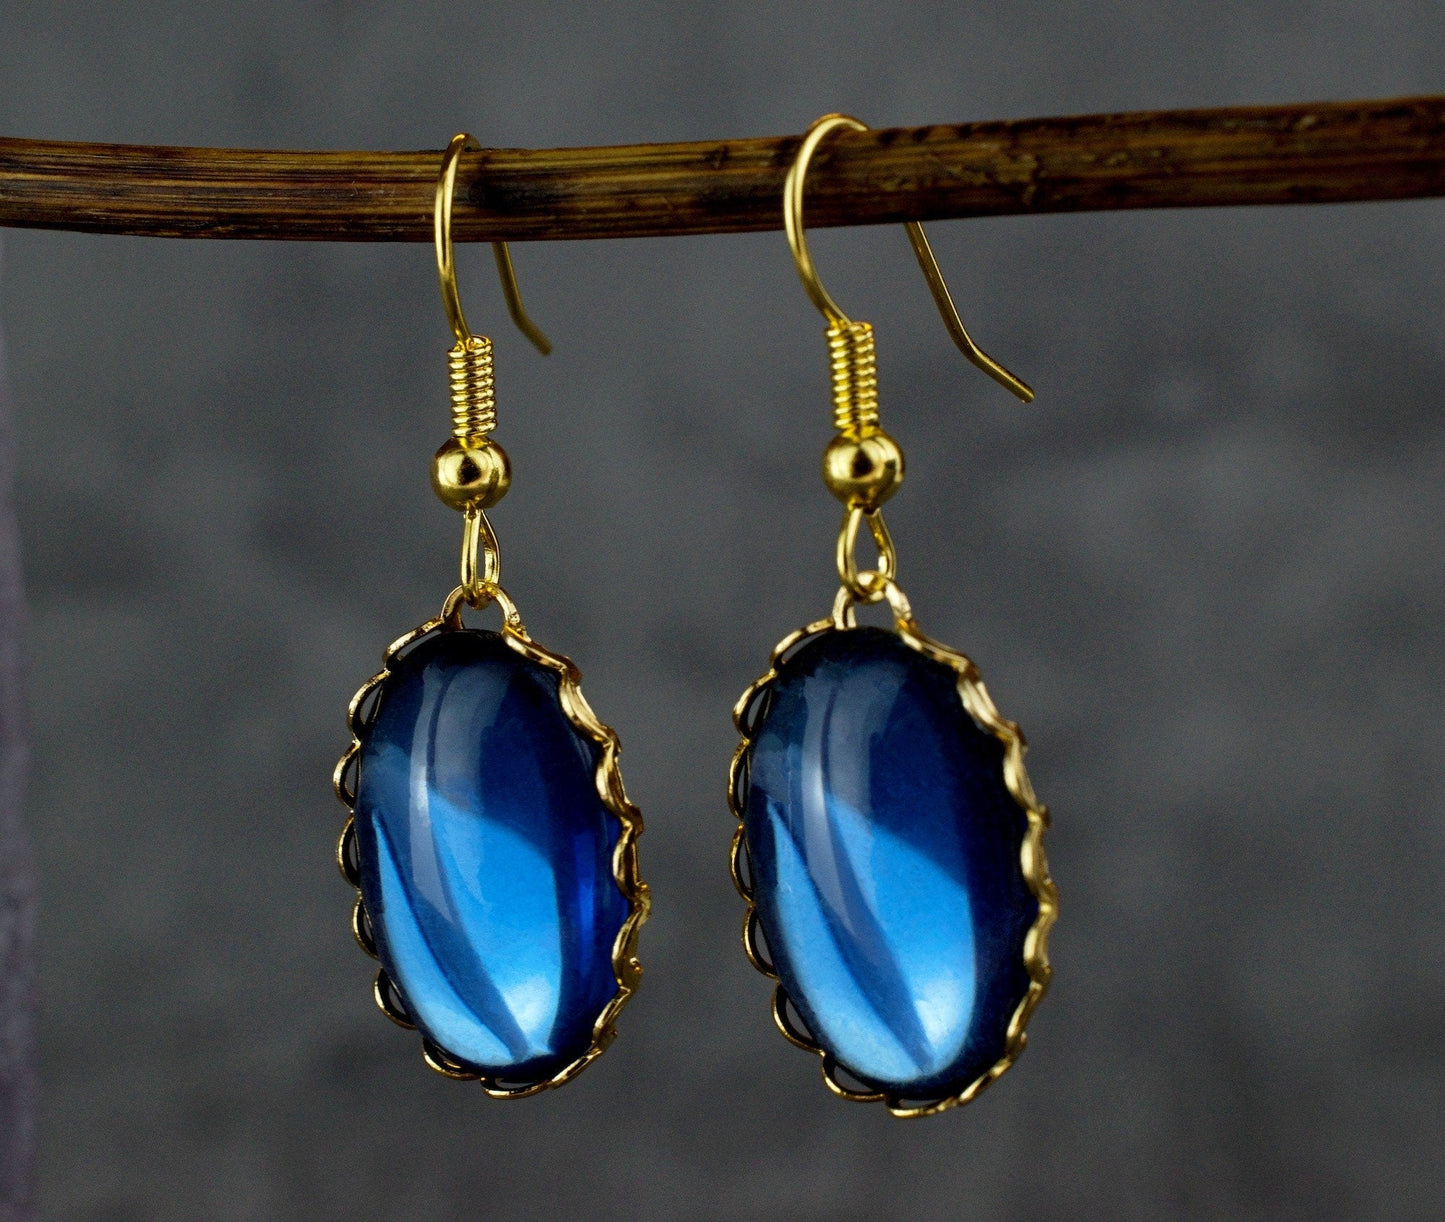 Blue shimmering earrings - gold-plated jewelry in vintage style - vinohr-65